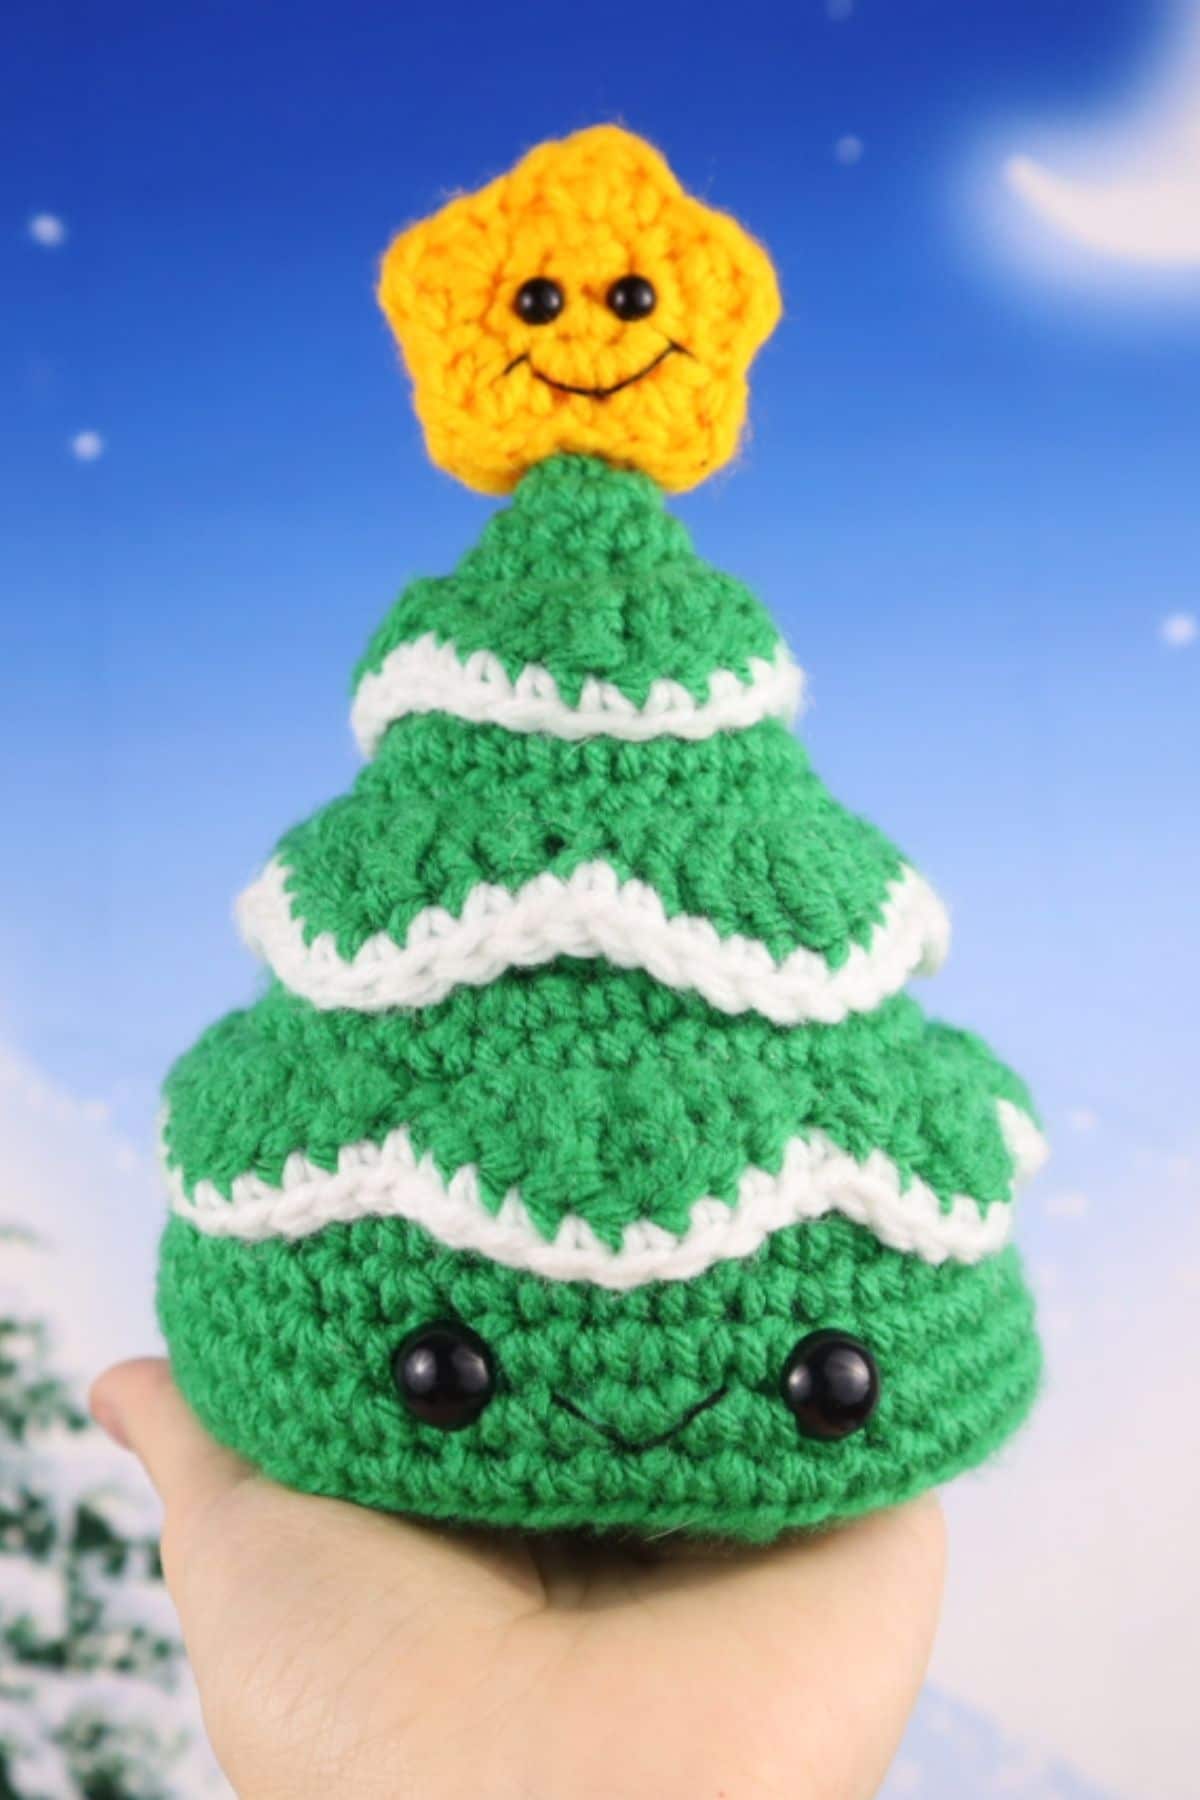 A hand holding a green crochet Chrismtas tree with eyes at the base and a yellow star on top smiling.